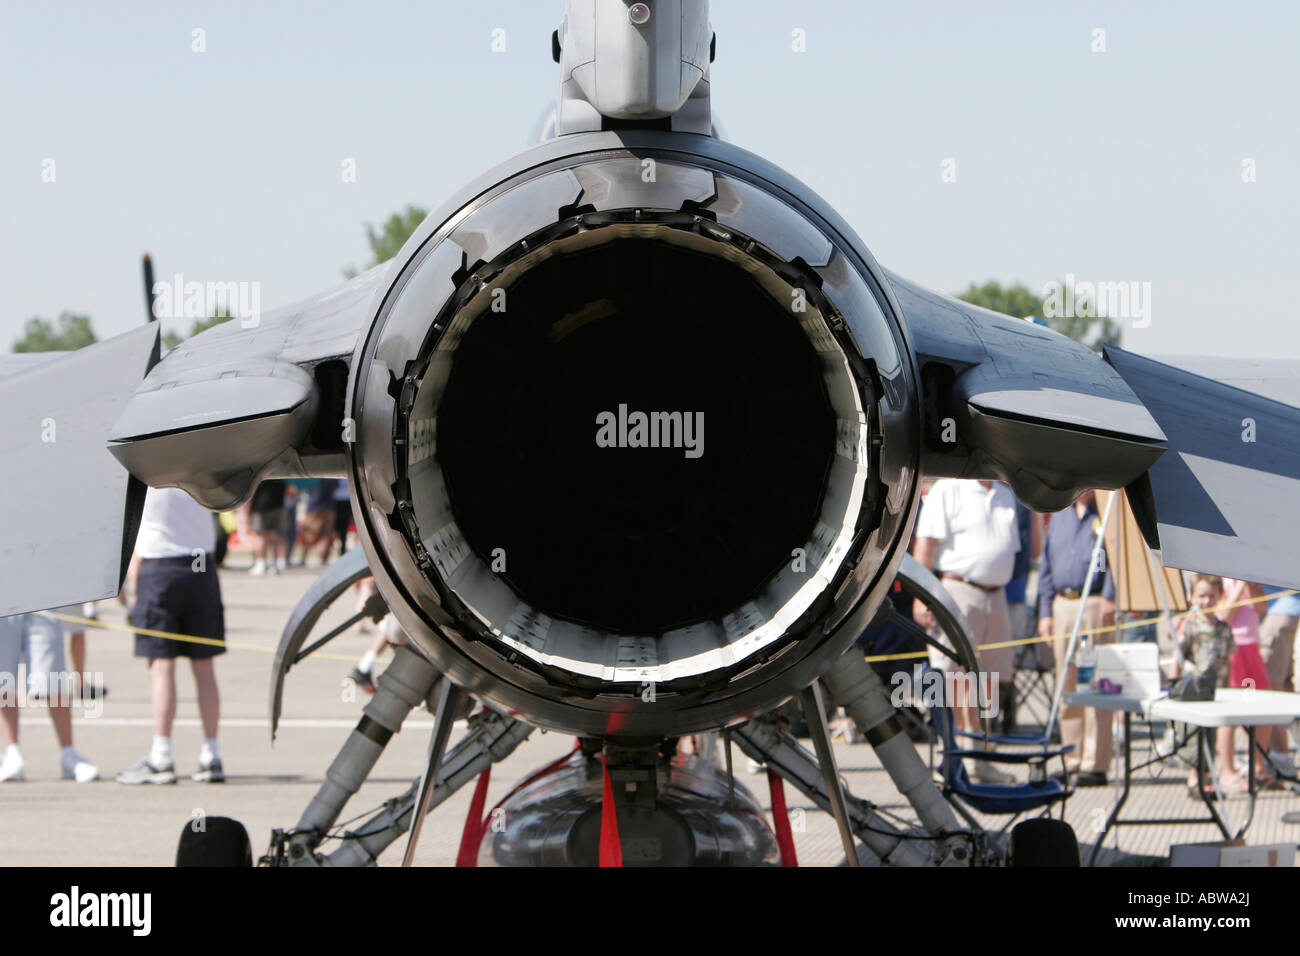 Rear view of F-16 jet fighter on the ground Stock Photo